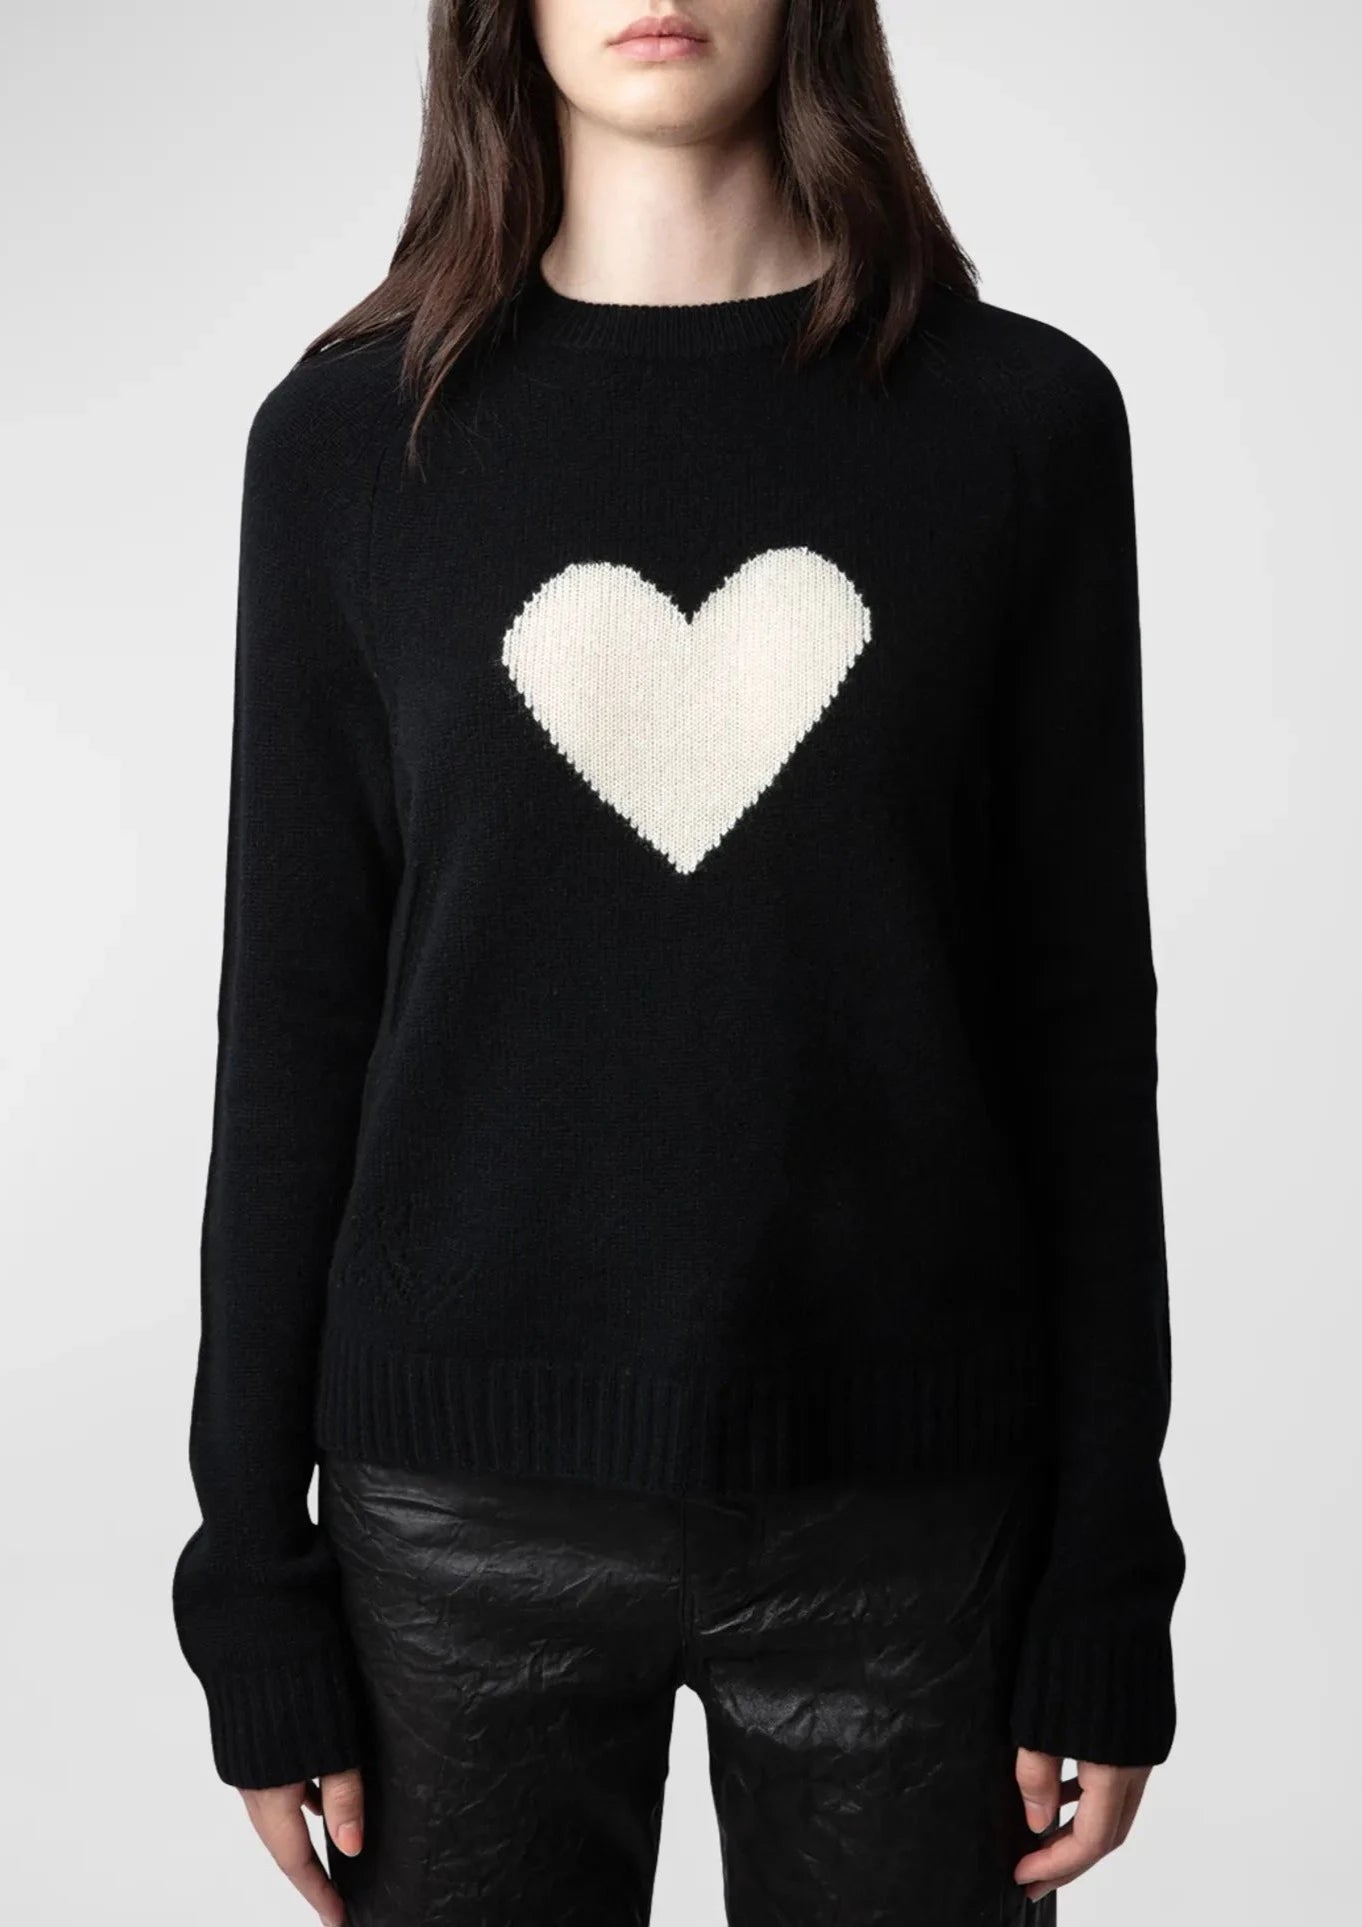 Zadig & Voltaire Ivory Heart Cashmere Sweater - Black